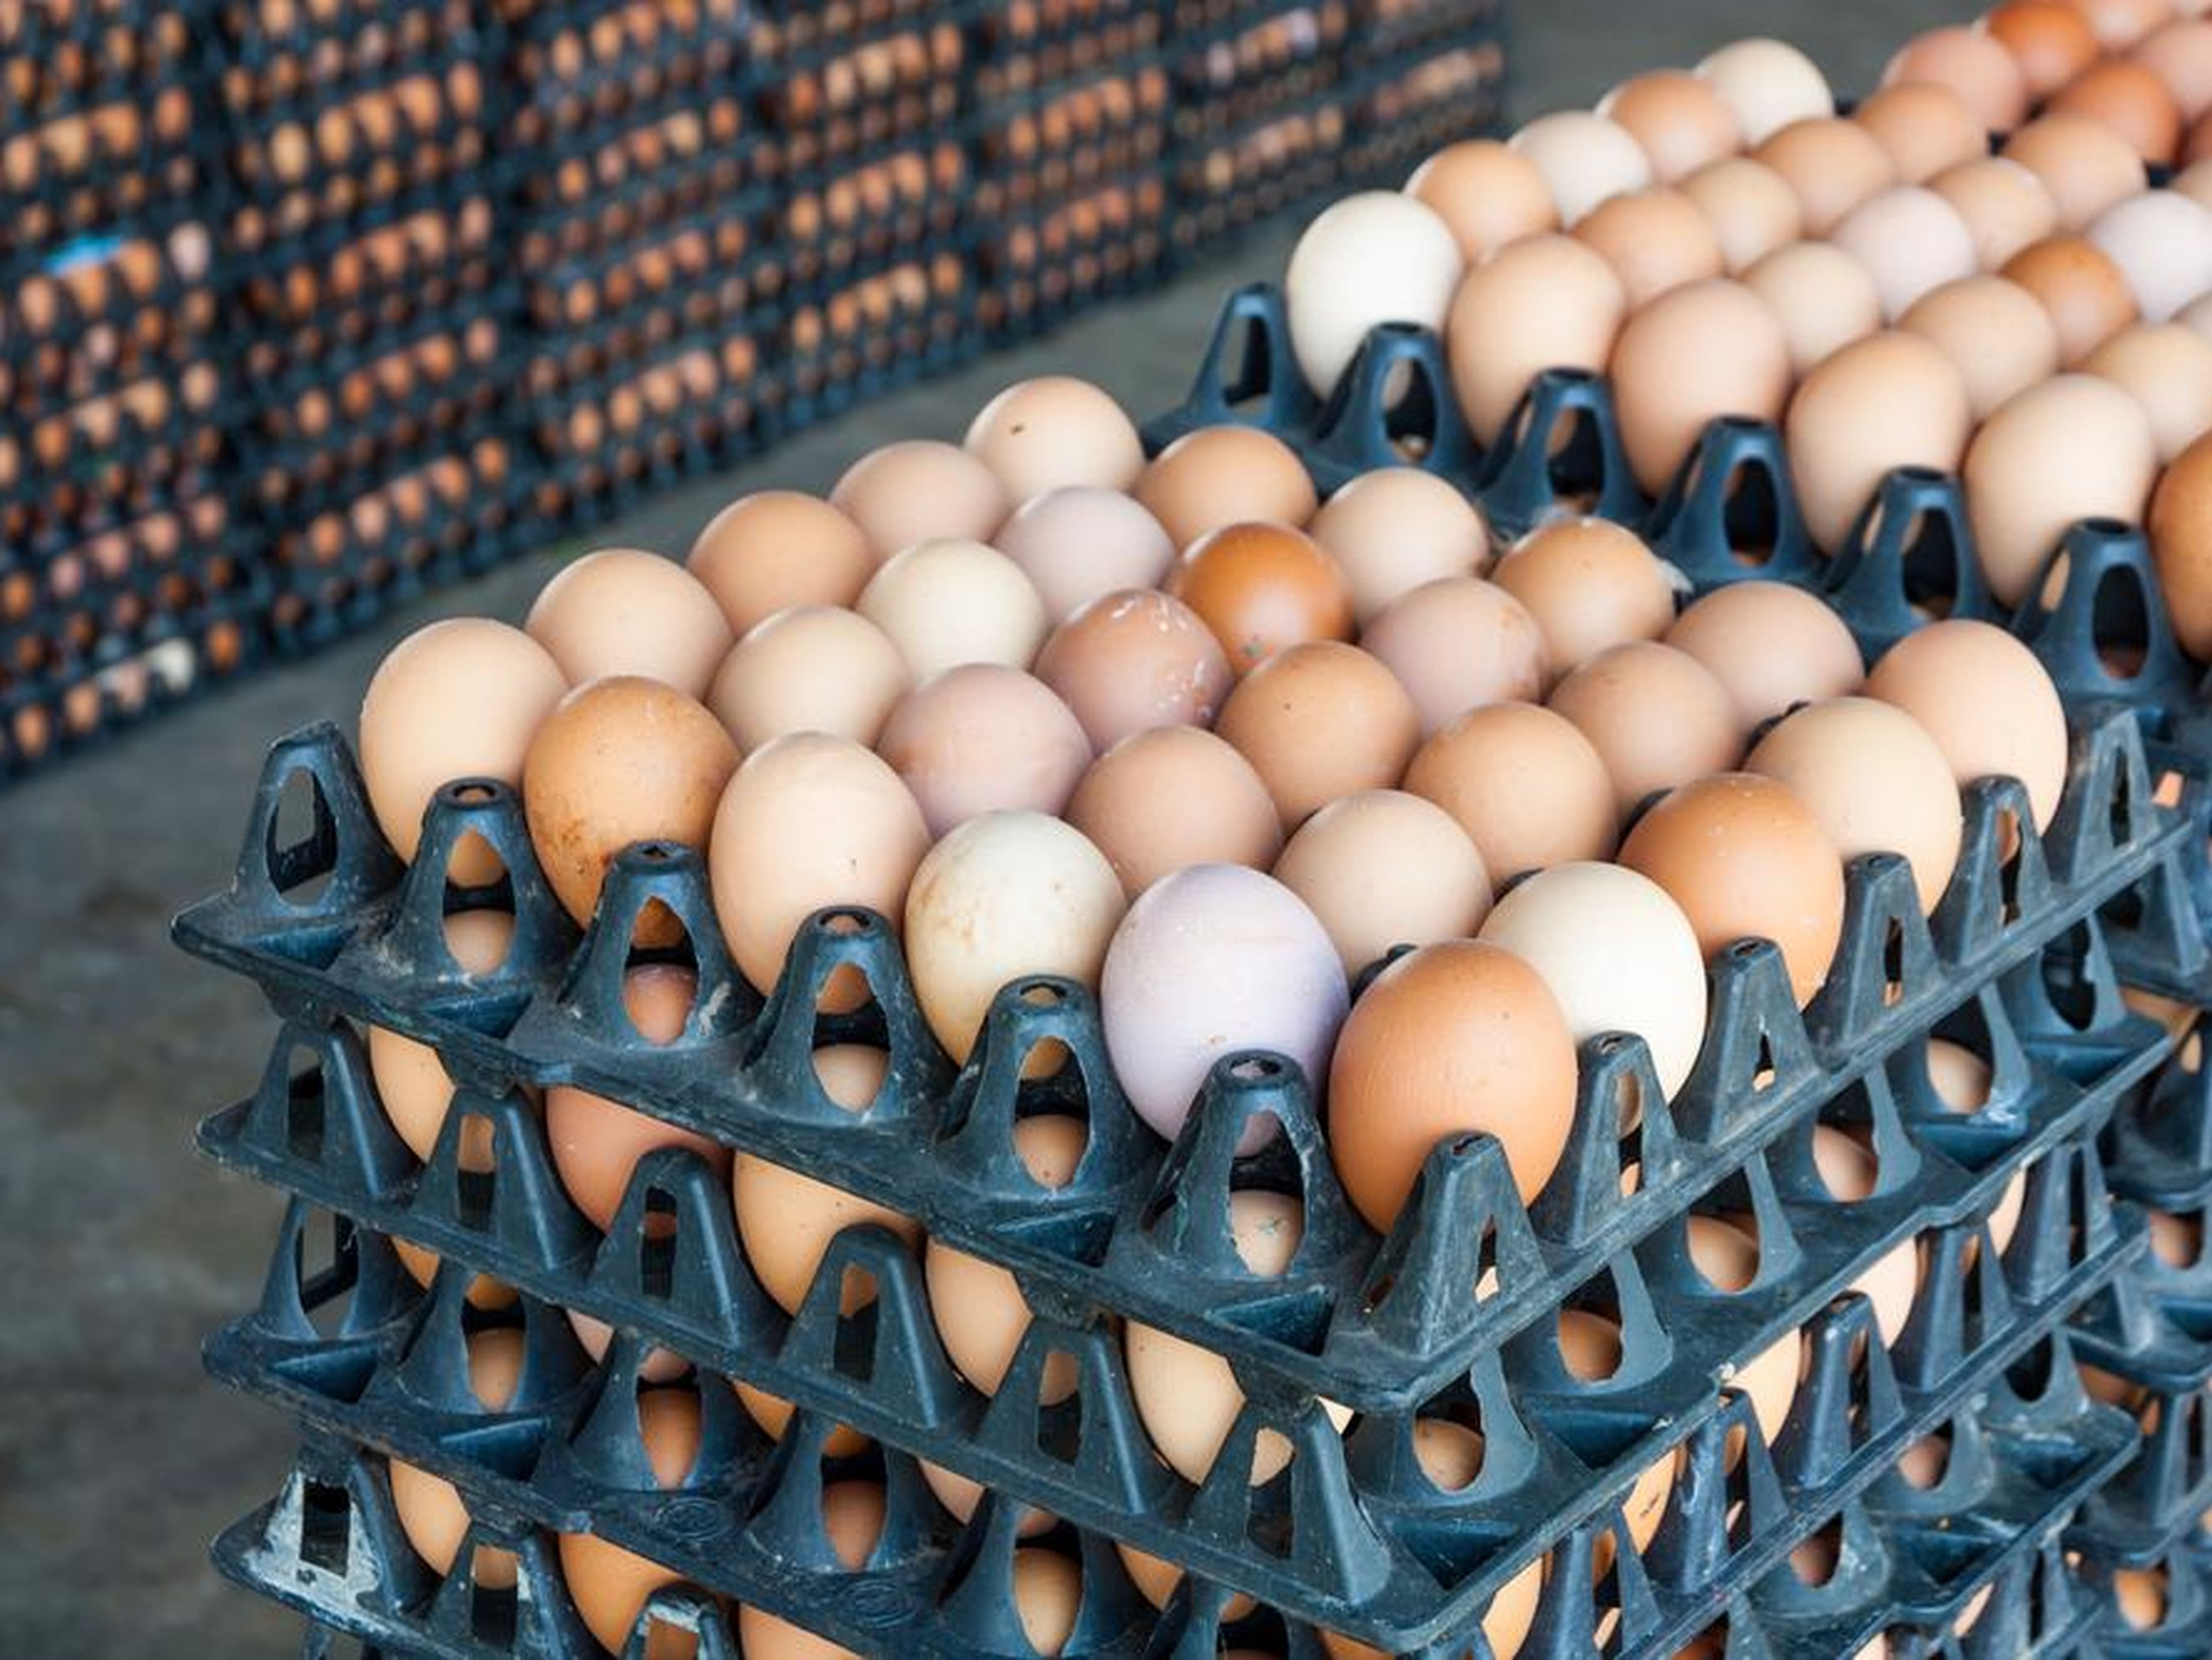 The recall affects more than 200 million eggs.